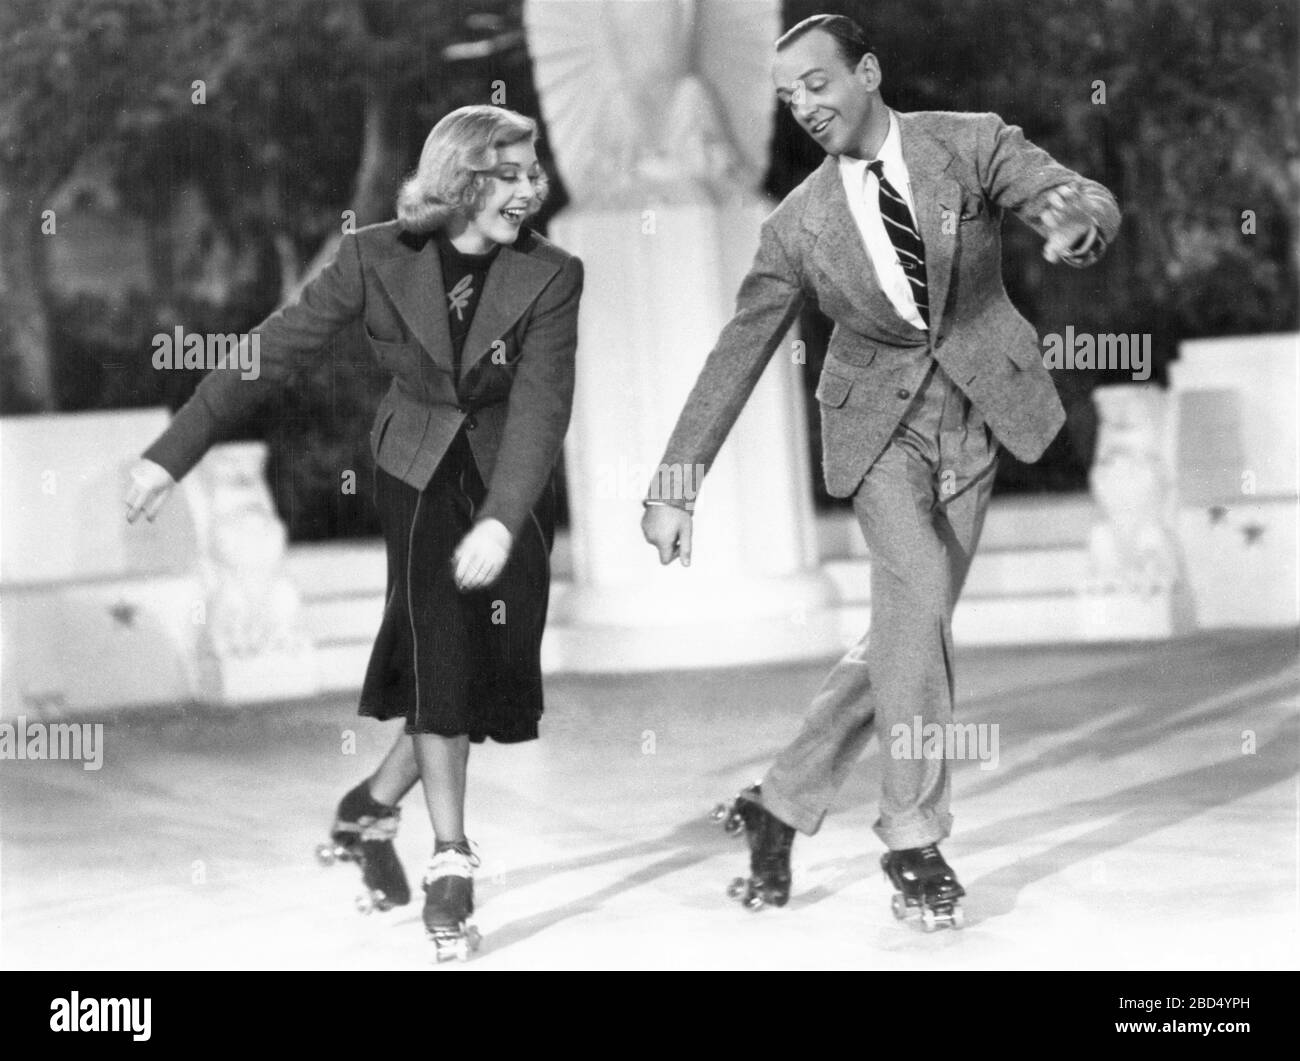 Fred Astaire And Ginger Rogers In Shall We Dance 1937 Director Mark Sandrich Music George Gershwin Lyrics Ira Gershwin Rko Radio Pictures Stock Photo Alamy